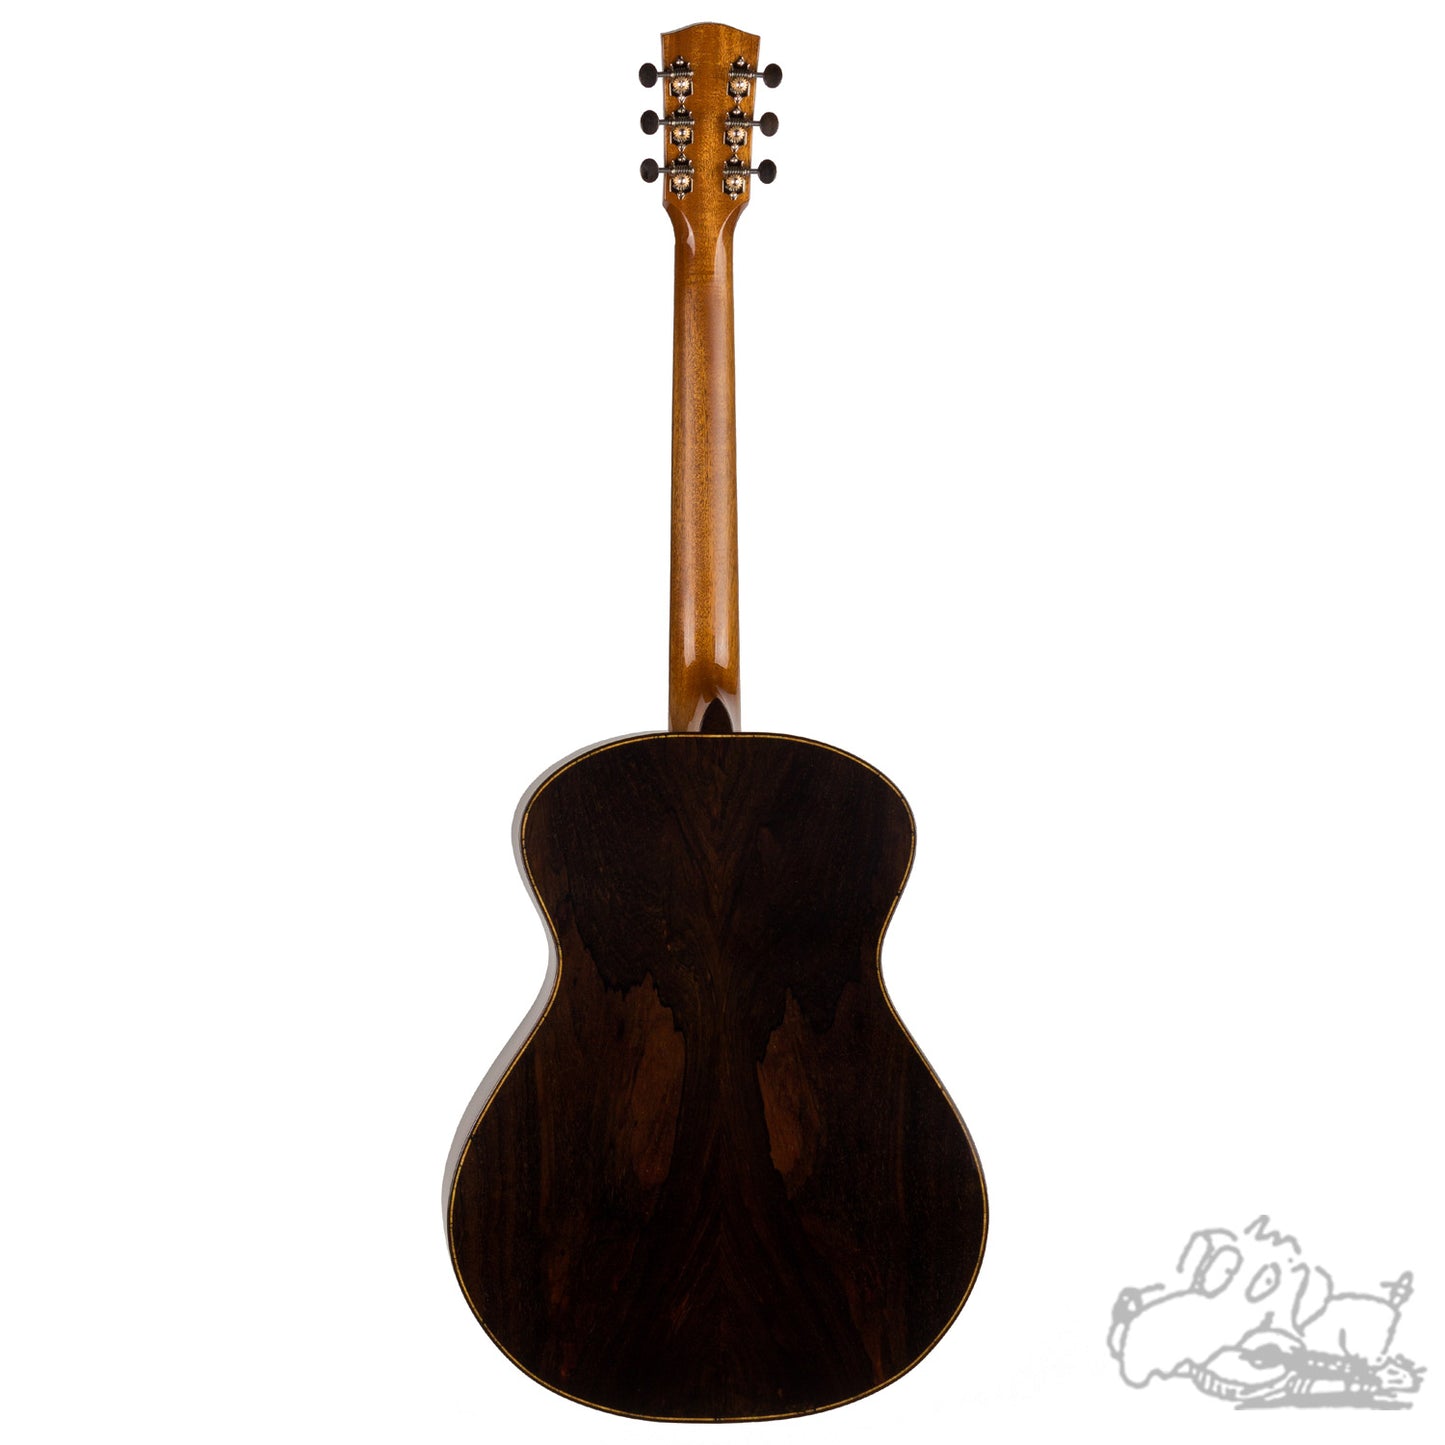 Bedell Limited Edition Serenade Orchestra Sitka/Unique Brazilian Rosewood